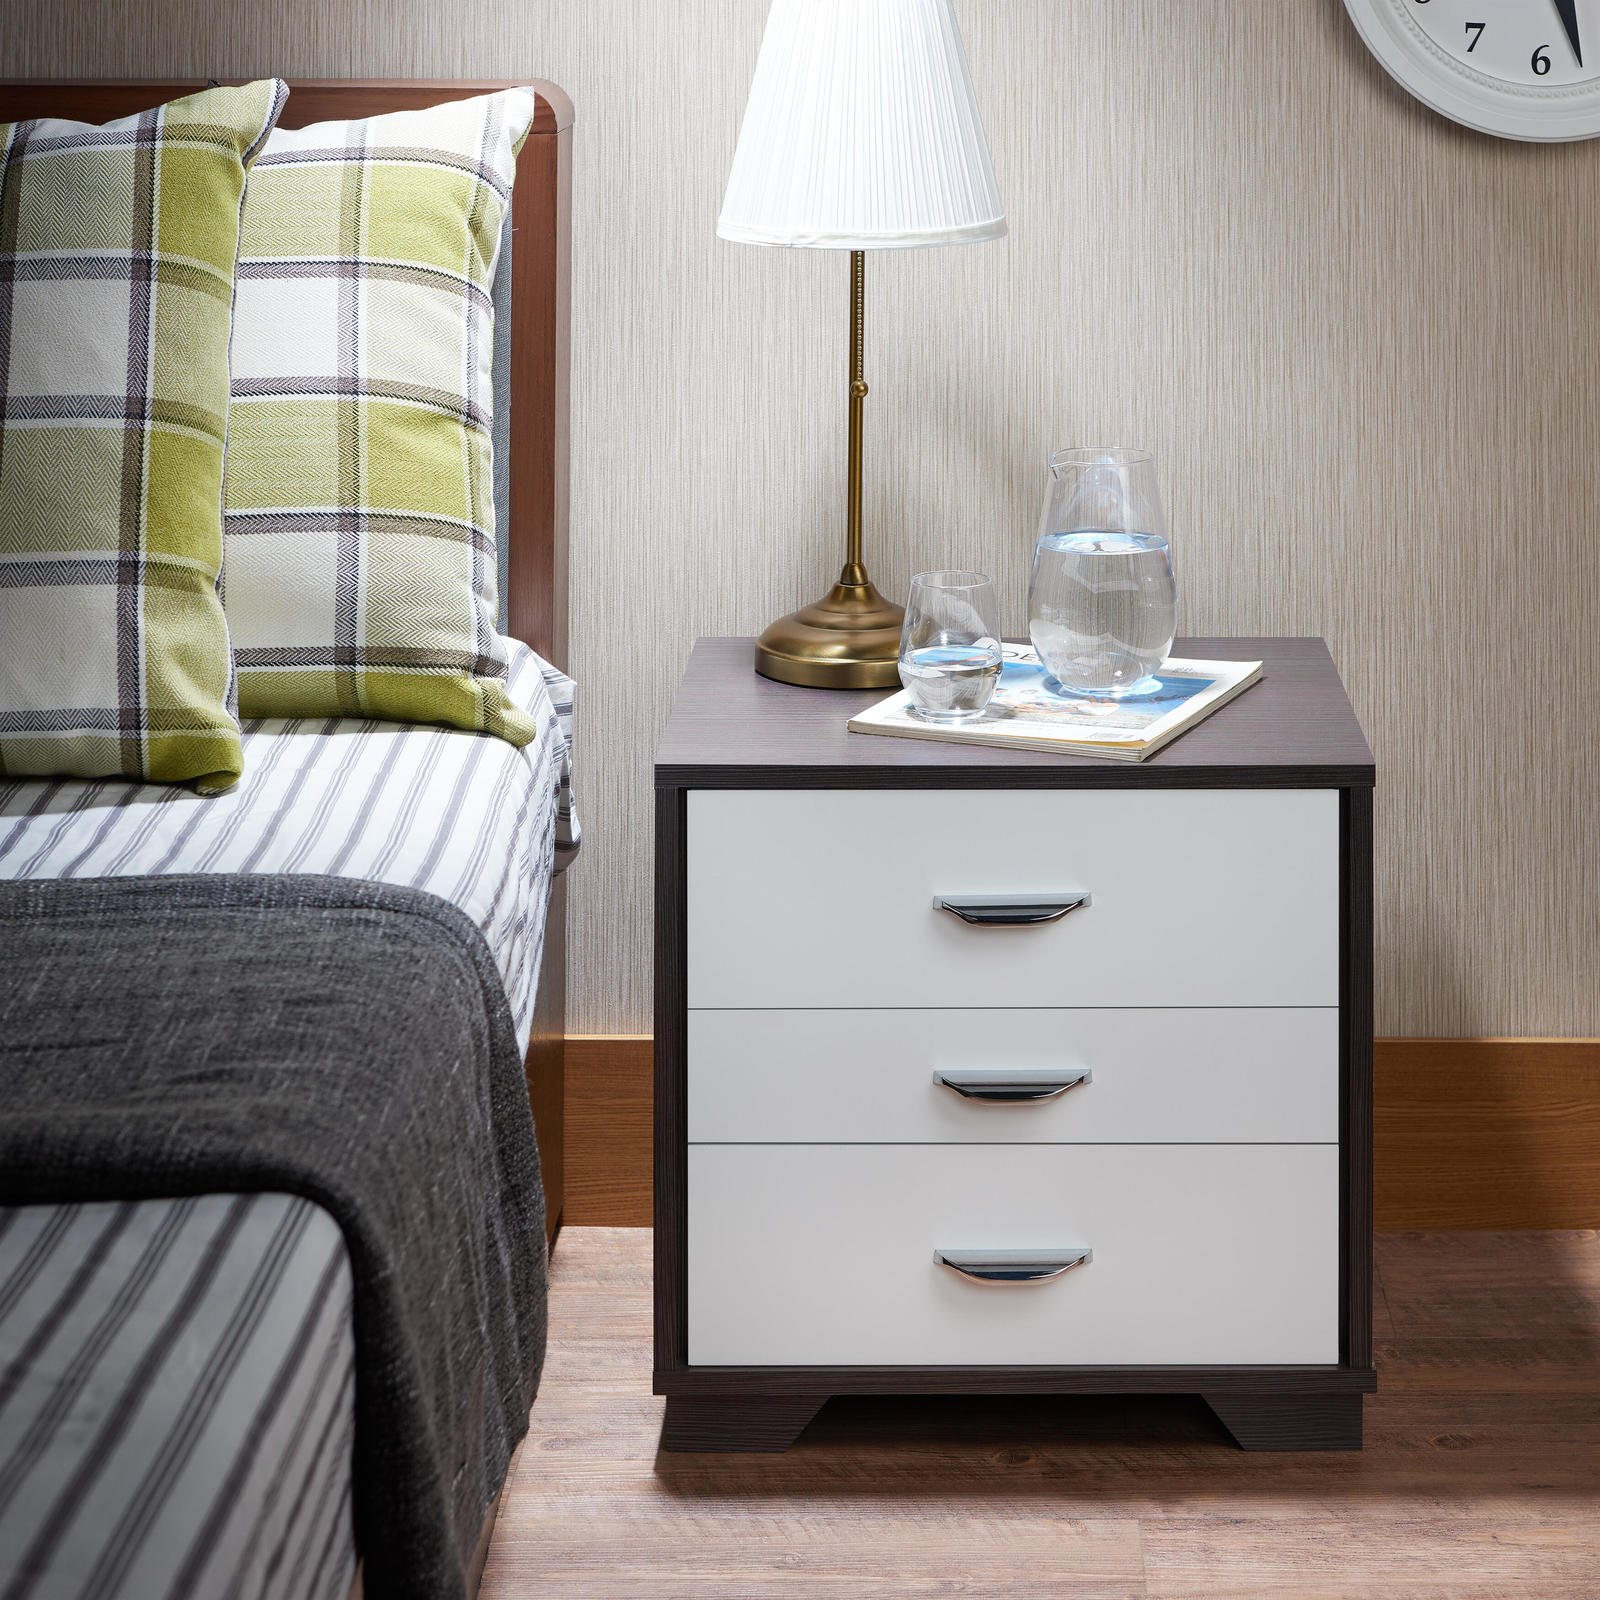 Eloy White Night Table Bedside Table for Bedroom - $147.91